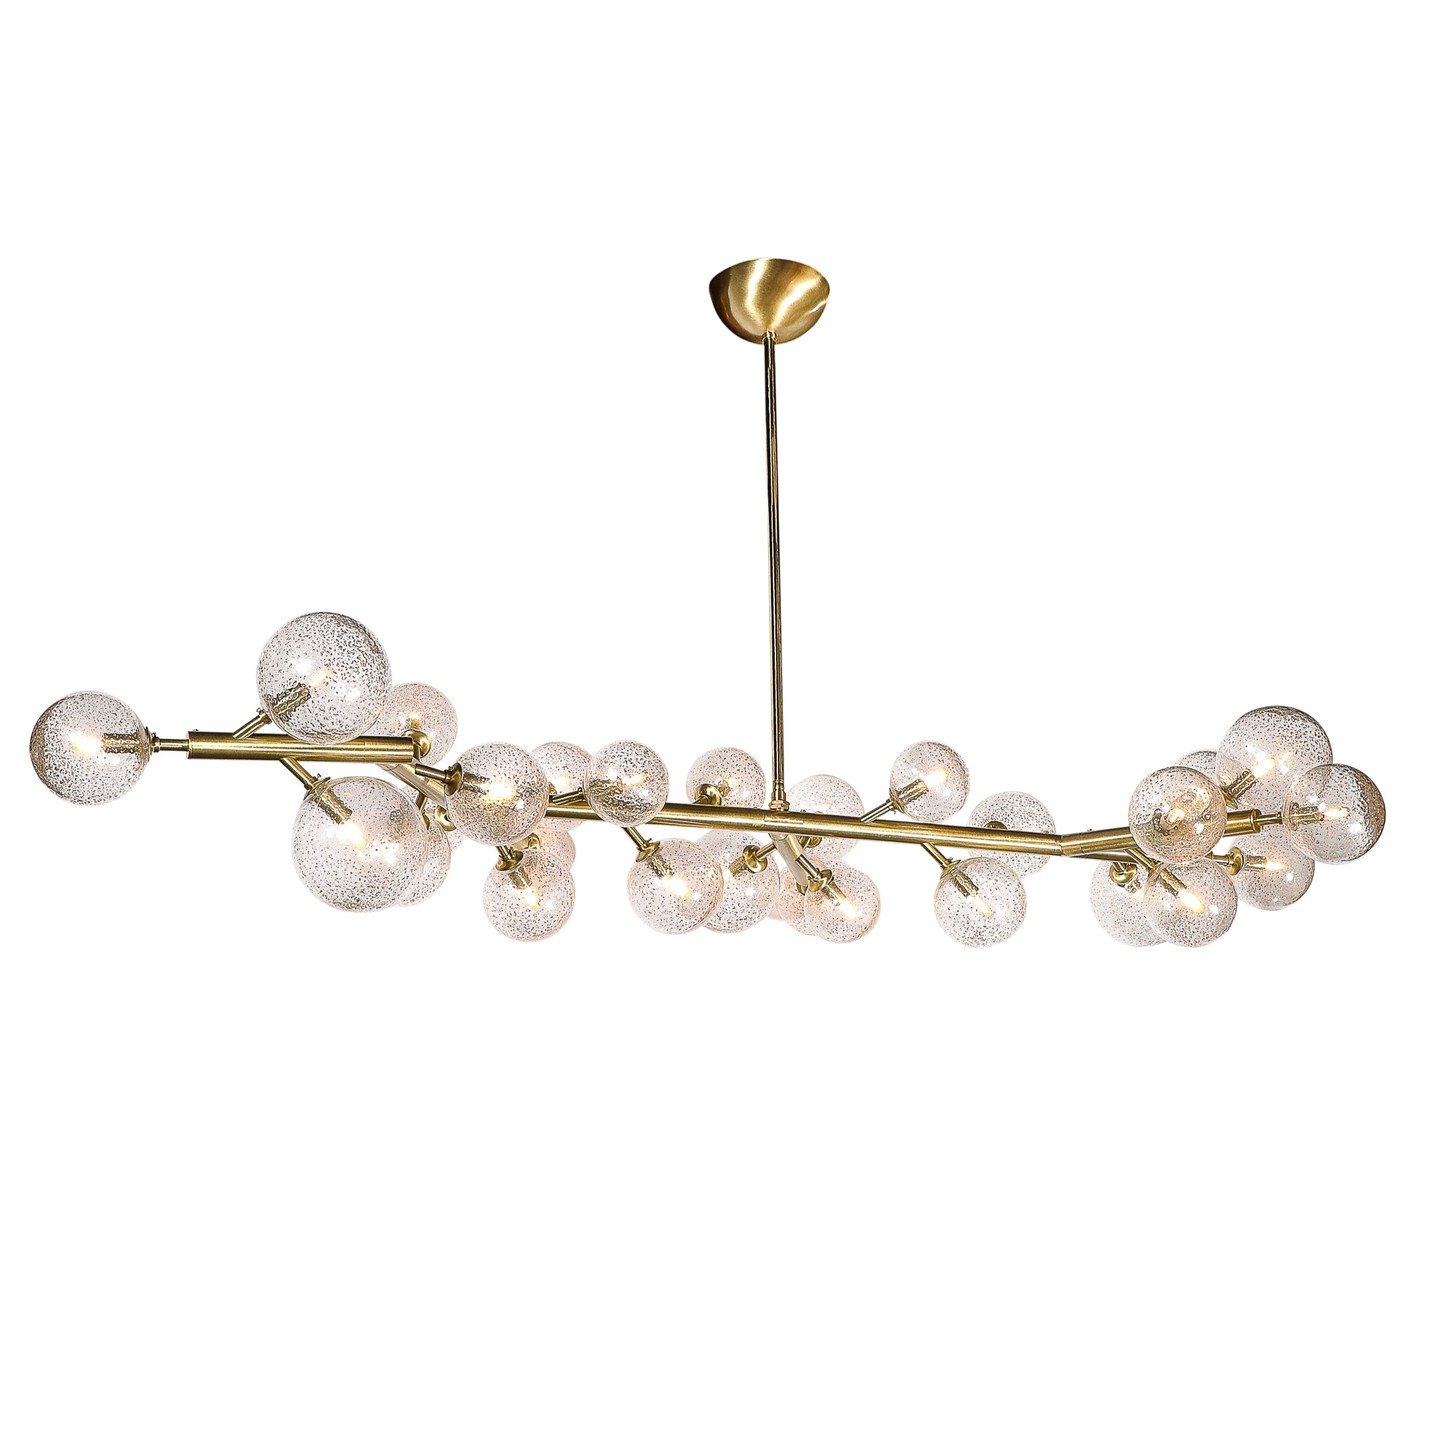 Custom Branch Form Hand-blown Murano Glass w/ 24k Gold &amp; Brass Fitted Chandelier

This stunningly elegant Custom Branch Form Hand-blown Murano Glass Chandelier in Transparent &amp; 24Karat Gold Flecks &amp; Brushed Brass Fittings originates from 